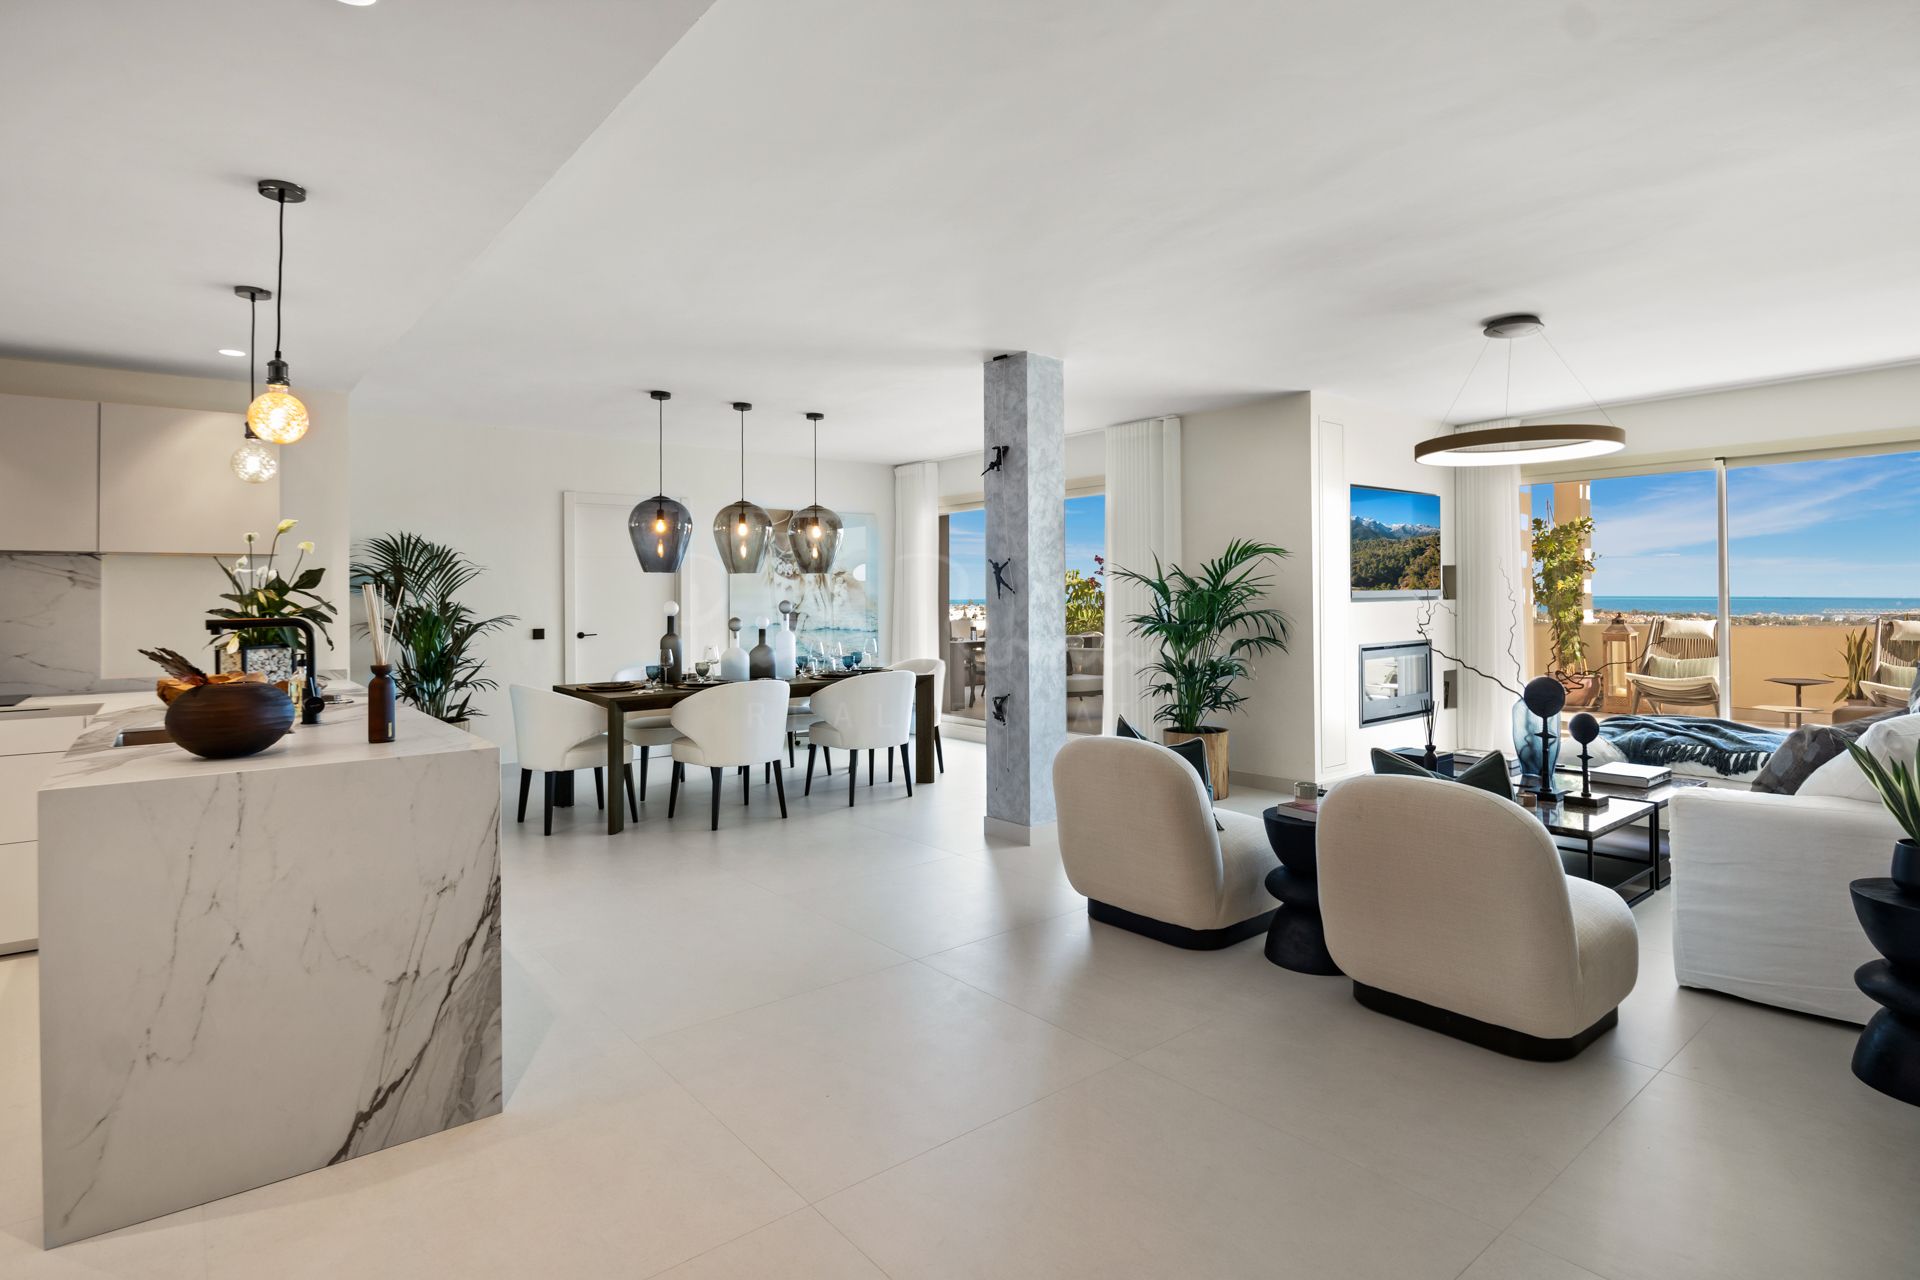 Duplex Penthouse in Palacetes Los Belvederes, Marbella